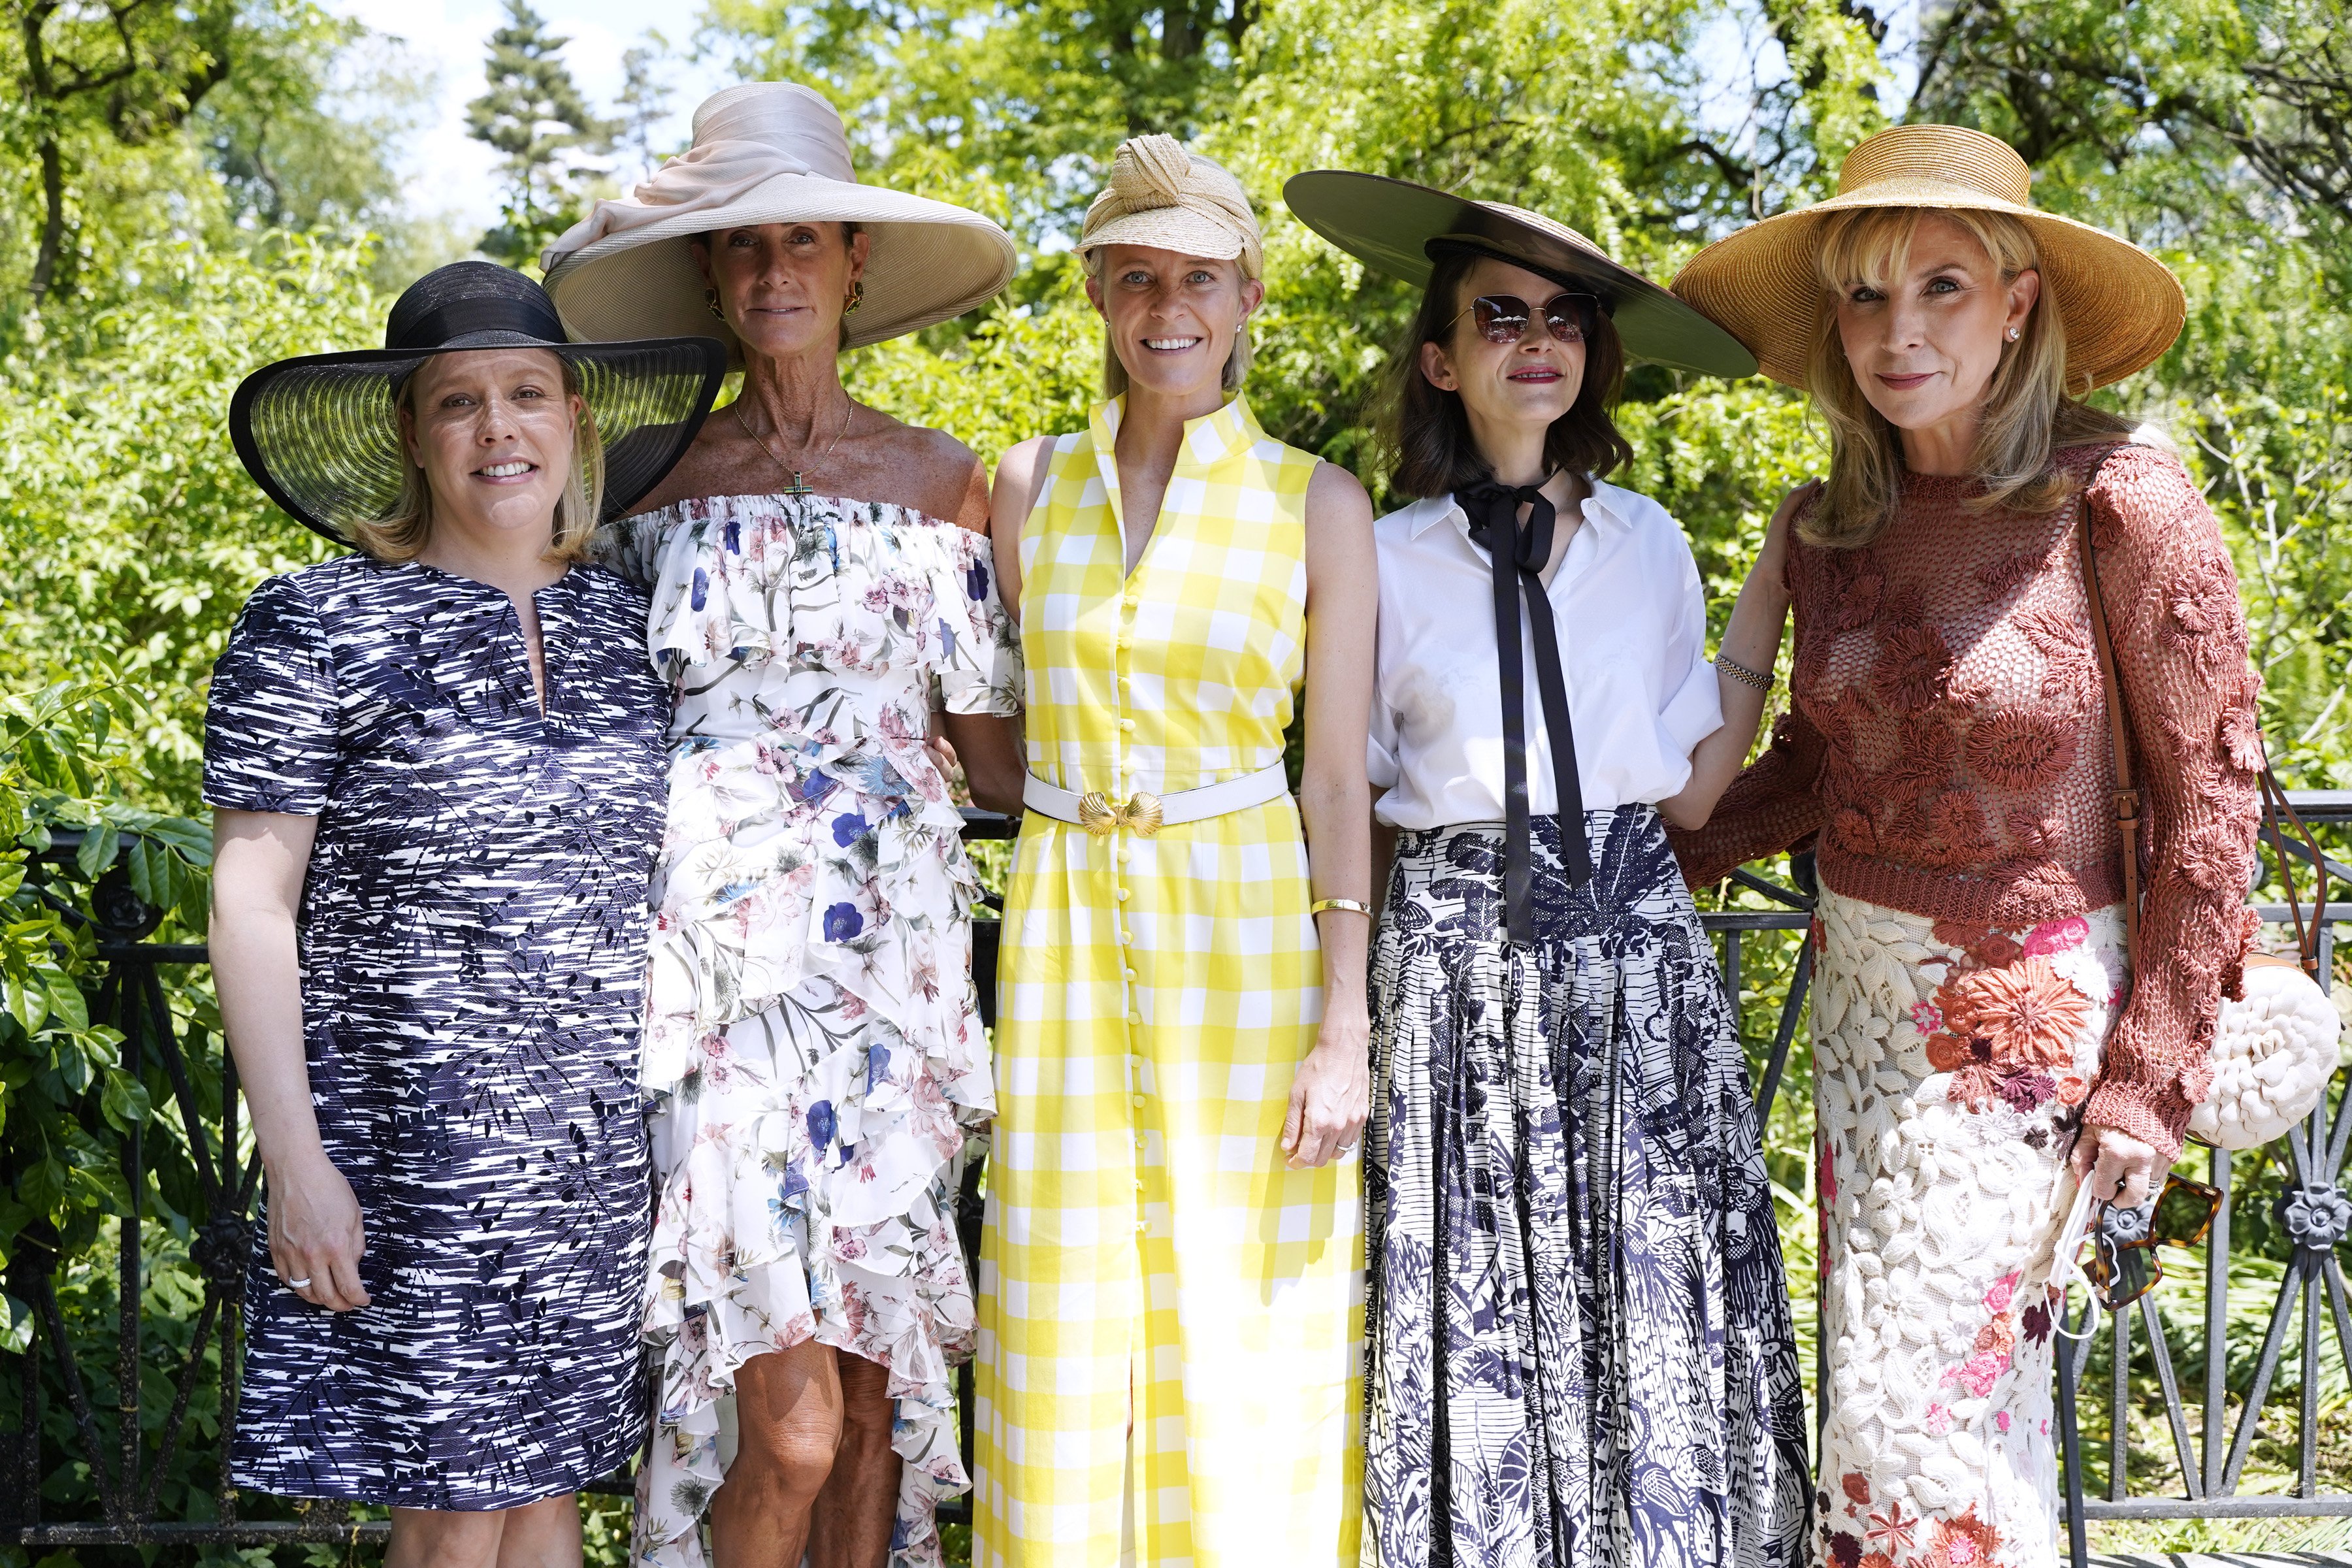  Elizabeth Rogers, Somers Farkas, Jocelyn Gailliot, Anne Stringfield and Margo Nederlander attend the Central Park Conservancy's 39th Annual Frederick Law Olmsted Awards Luncheon on May 18, 2021, in New York City. | Source: Getty Images